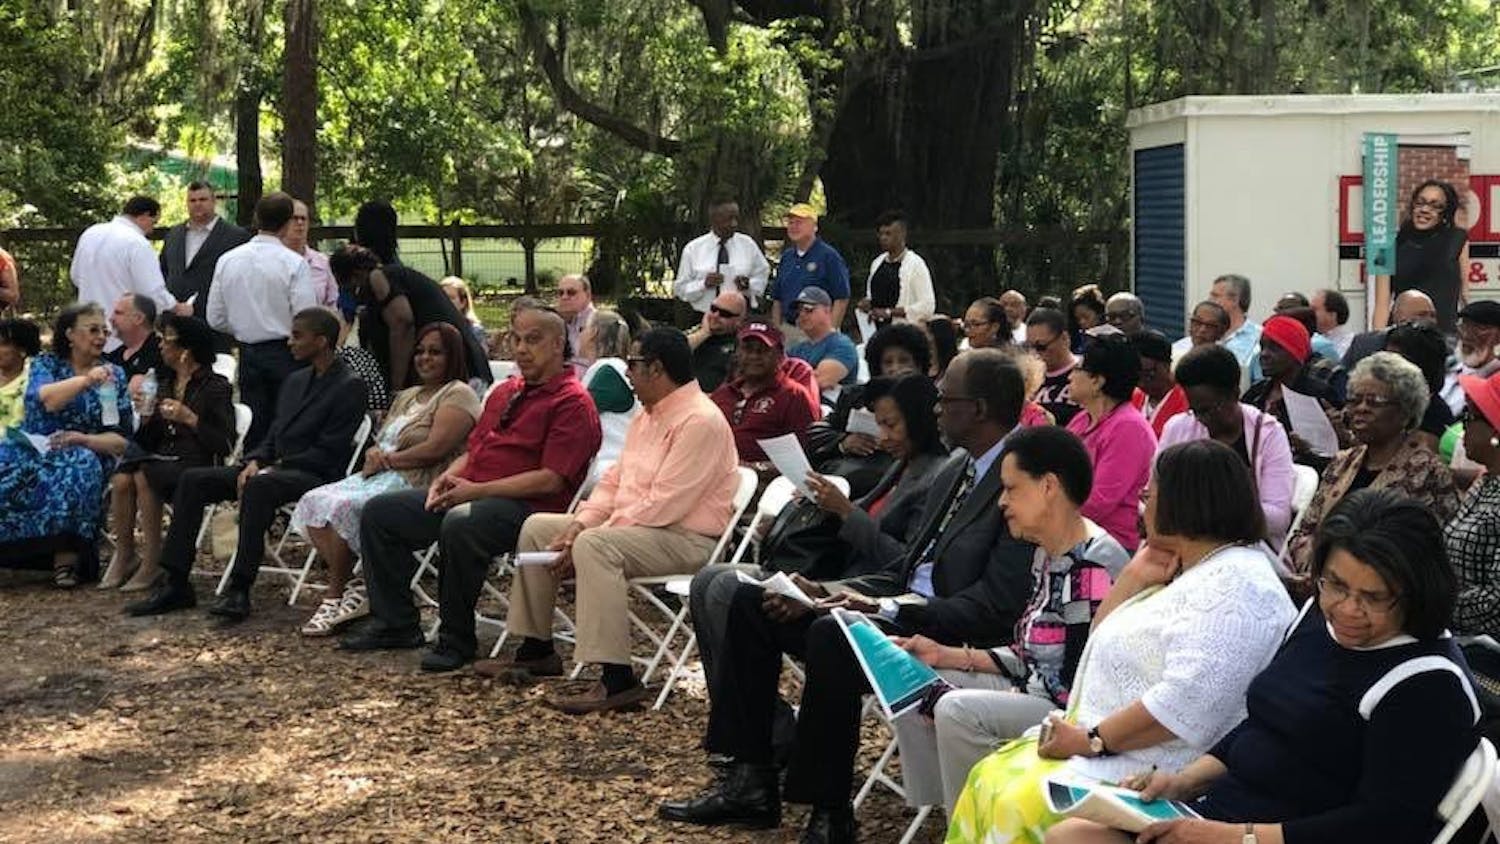 YouthBuild, a Gainesville non-profit, opened its new building, located at 635 NW 6th St. on Saturday. The organization helps young adults earn high school diplomas and receive affordable housing in the community.